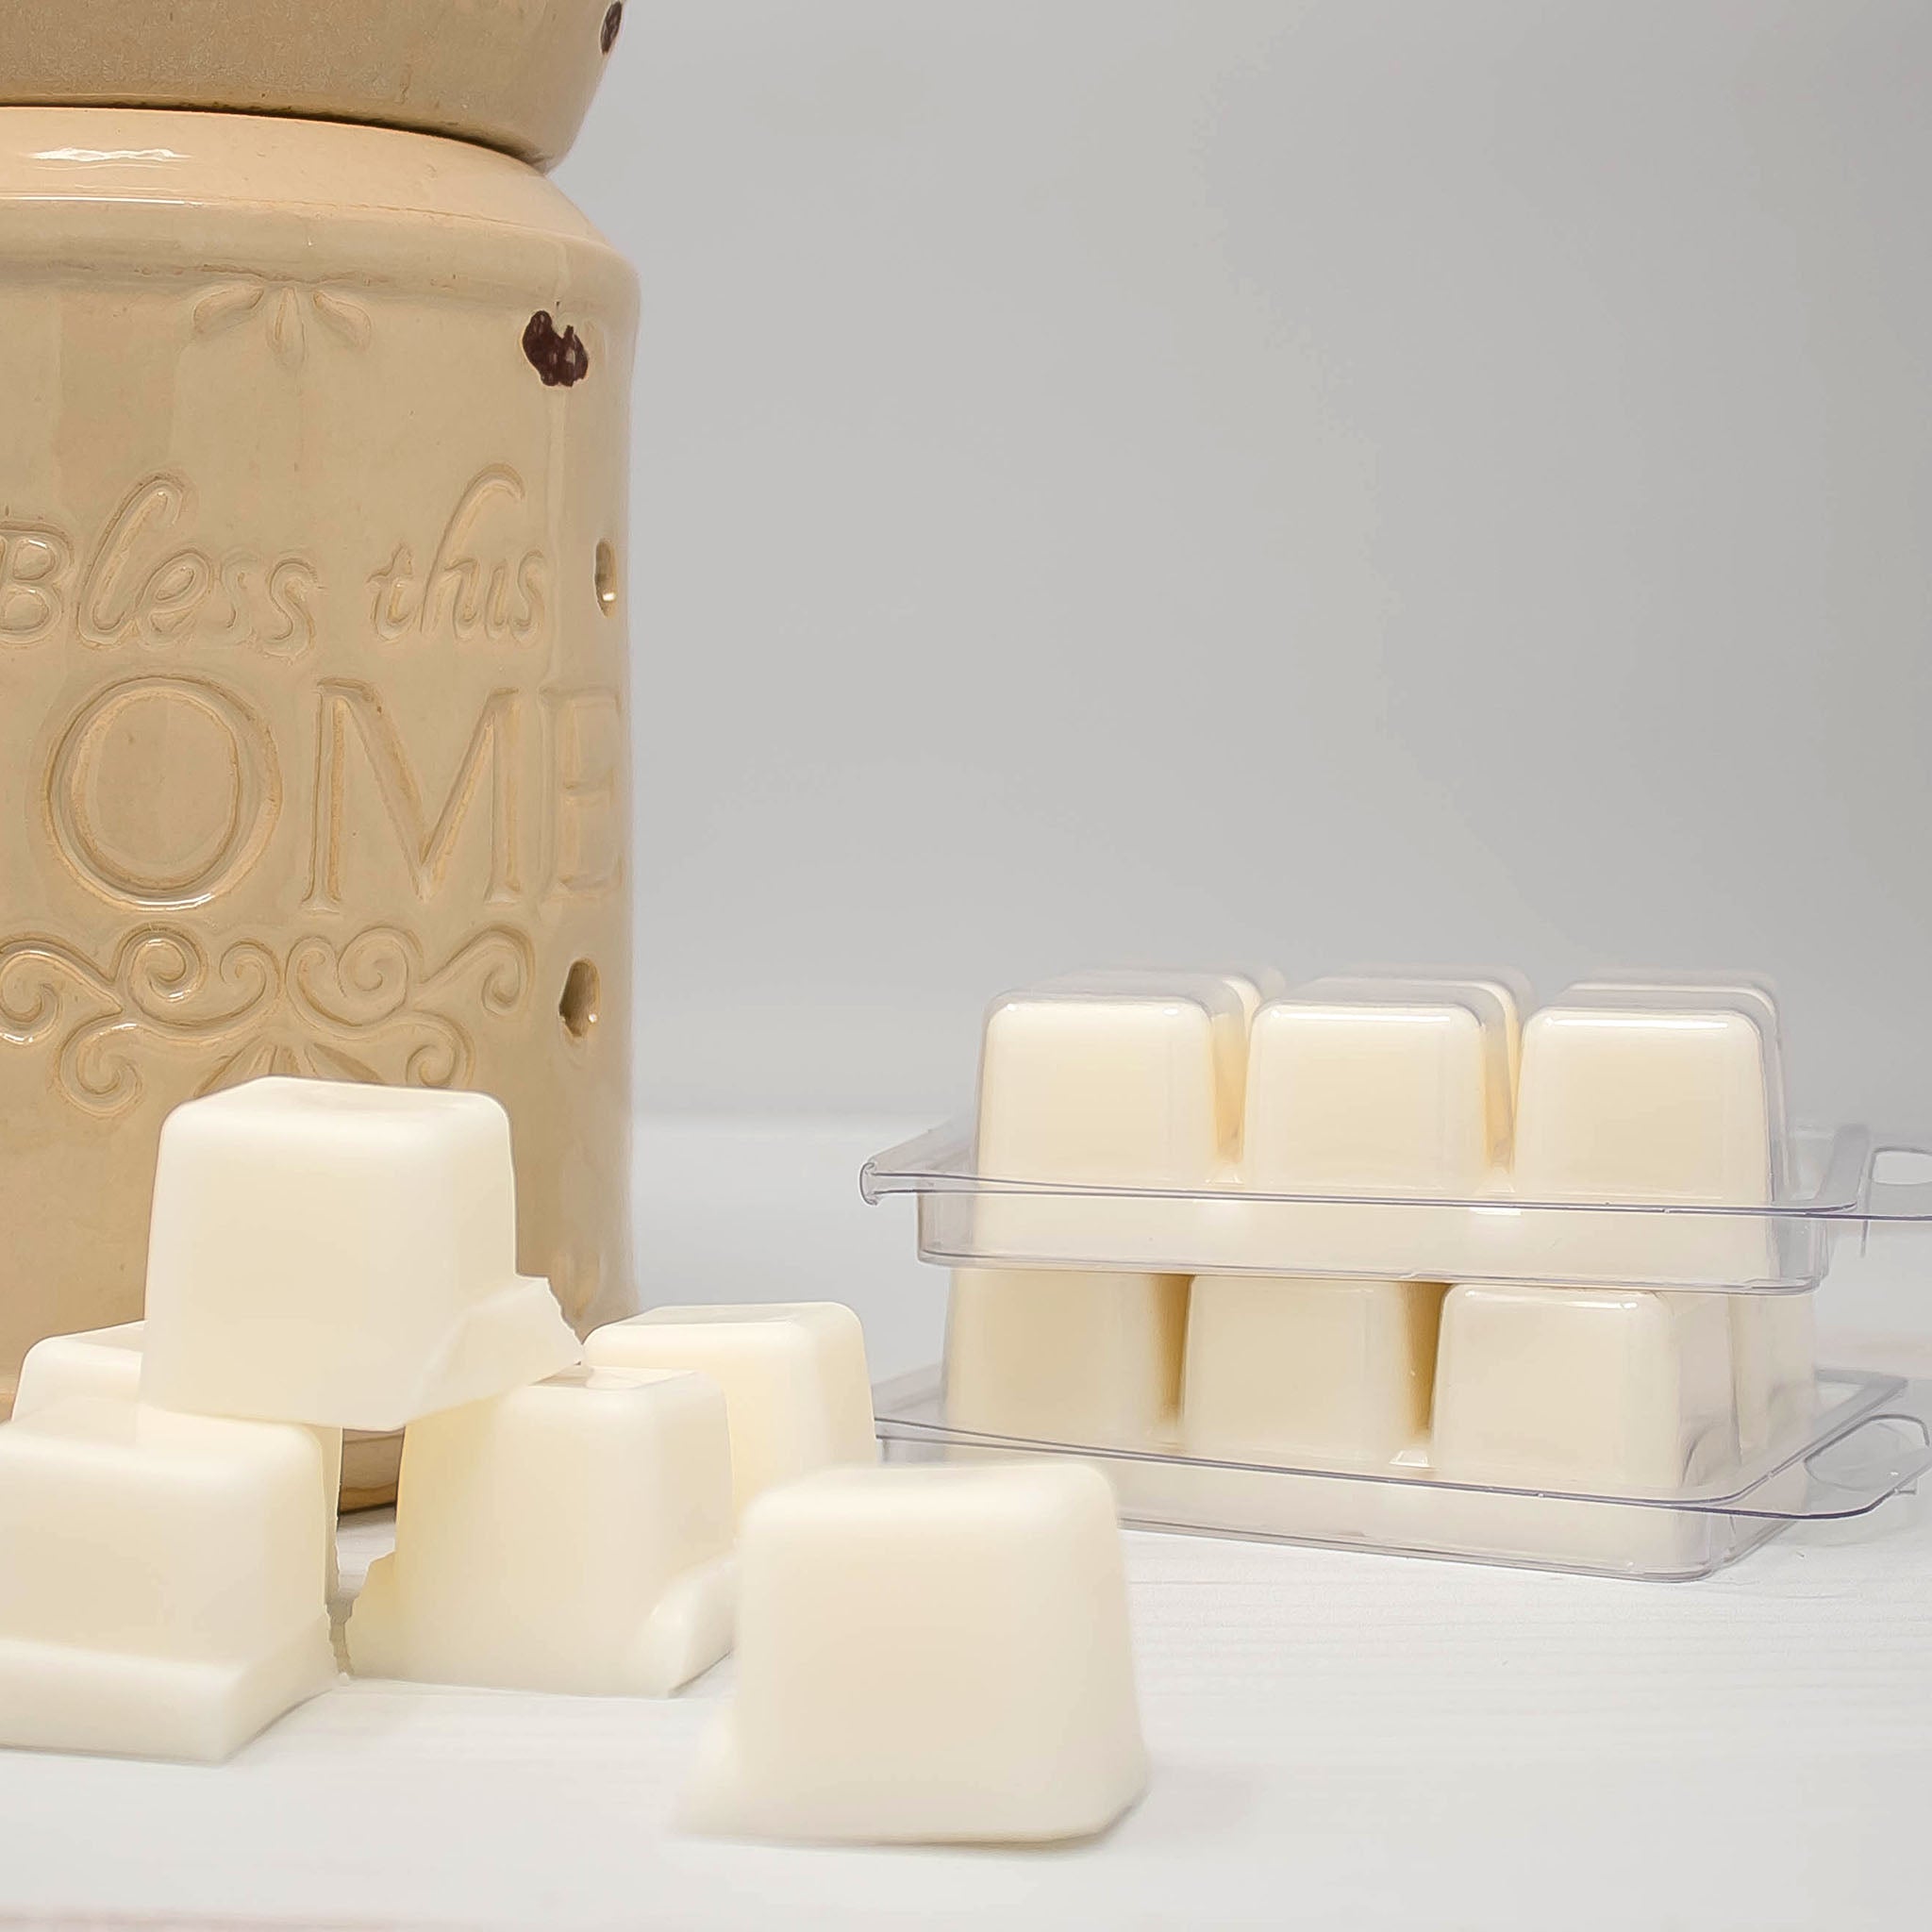 Christmas Cabin Scented Wax Cubes